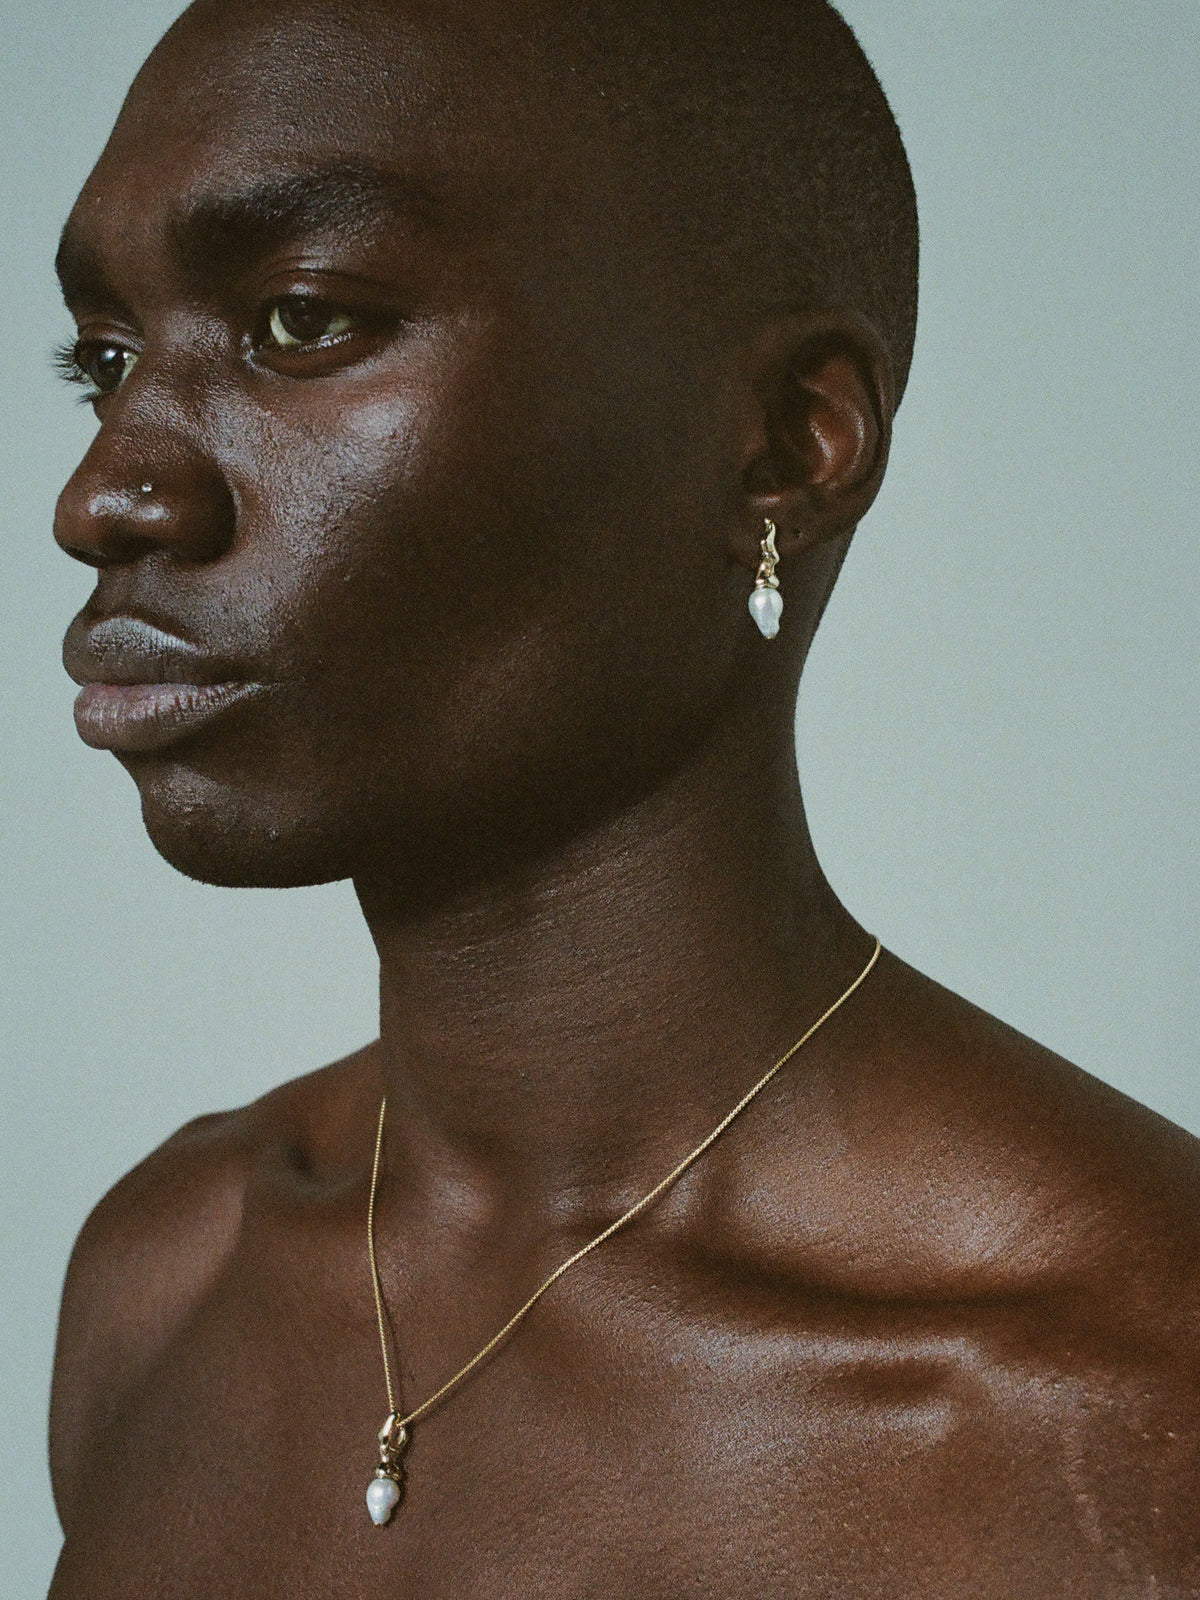 FARIS SPRIG PERLA Earrings in 14k gold shown on male model, styled with SPRIG Necklace in 14k gold-plated bronze.